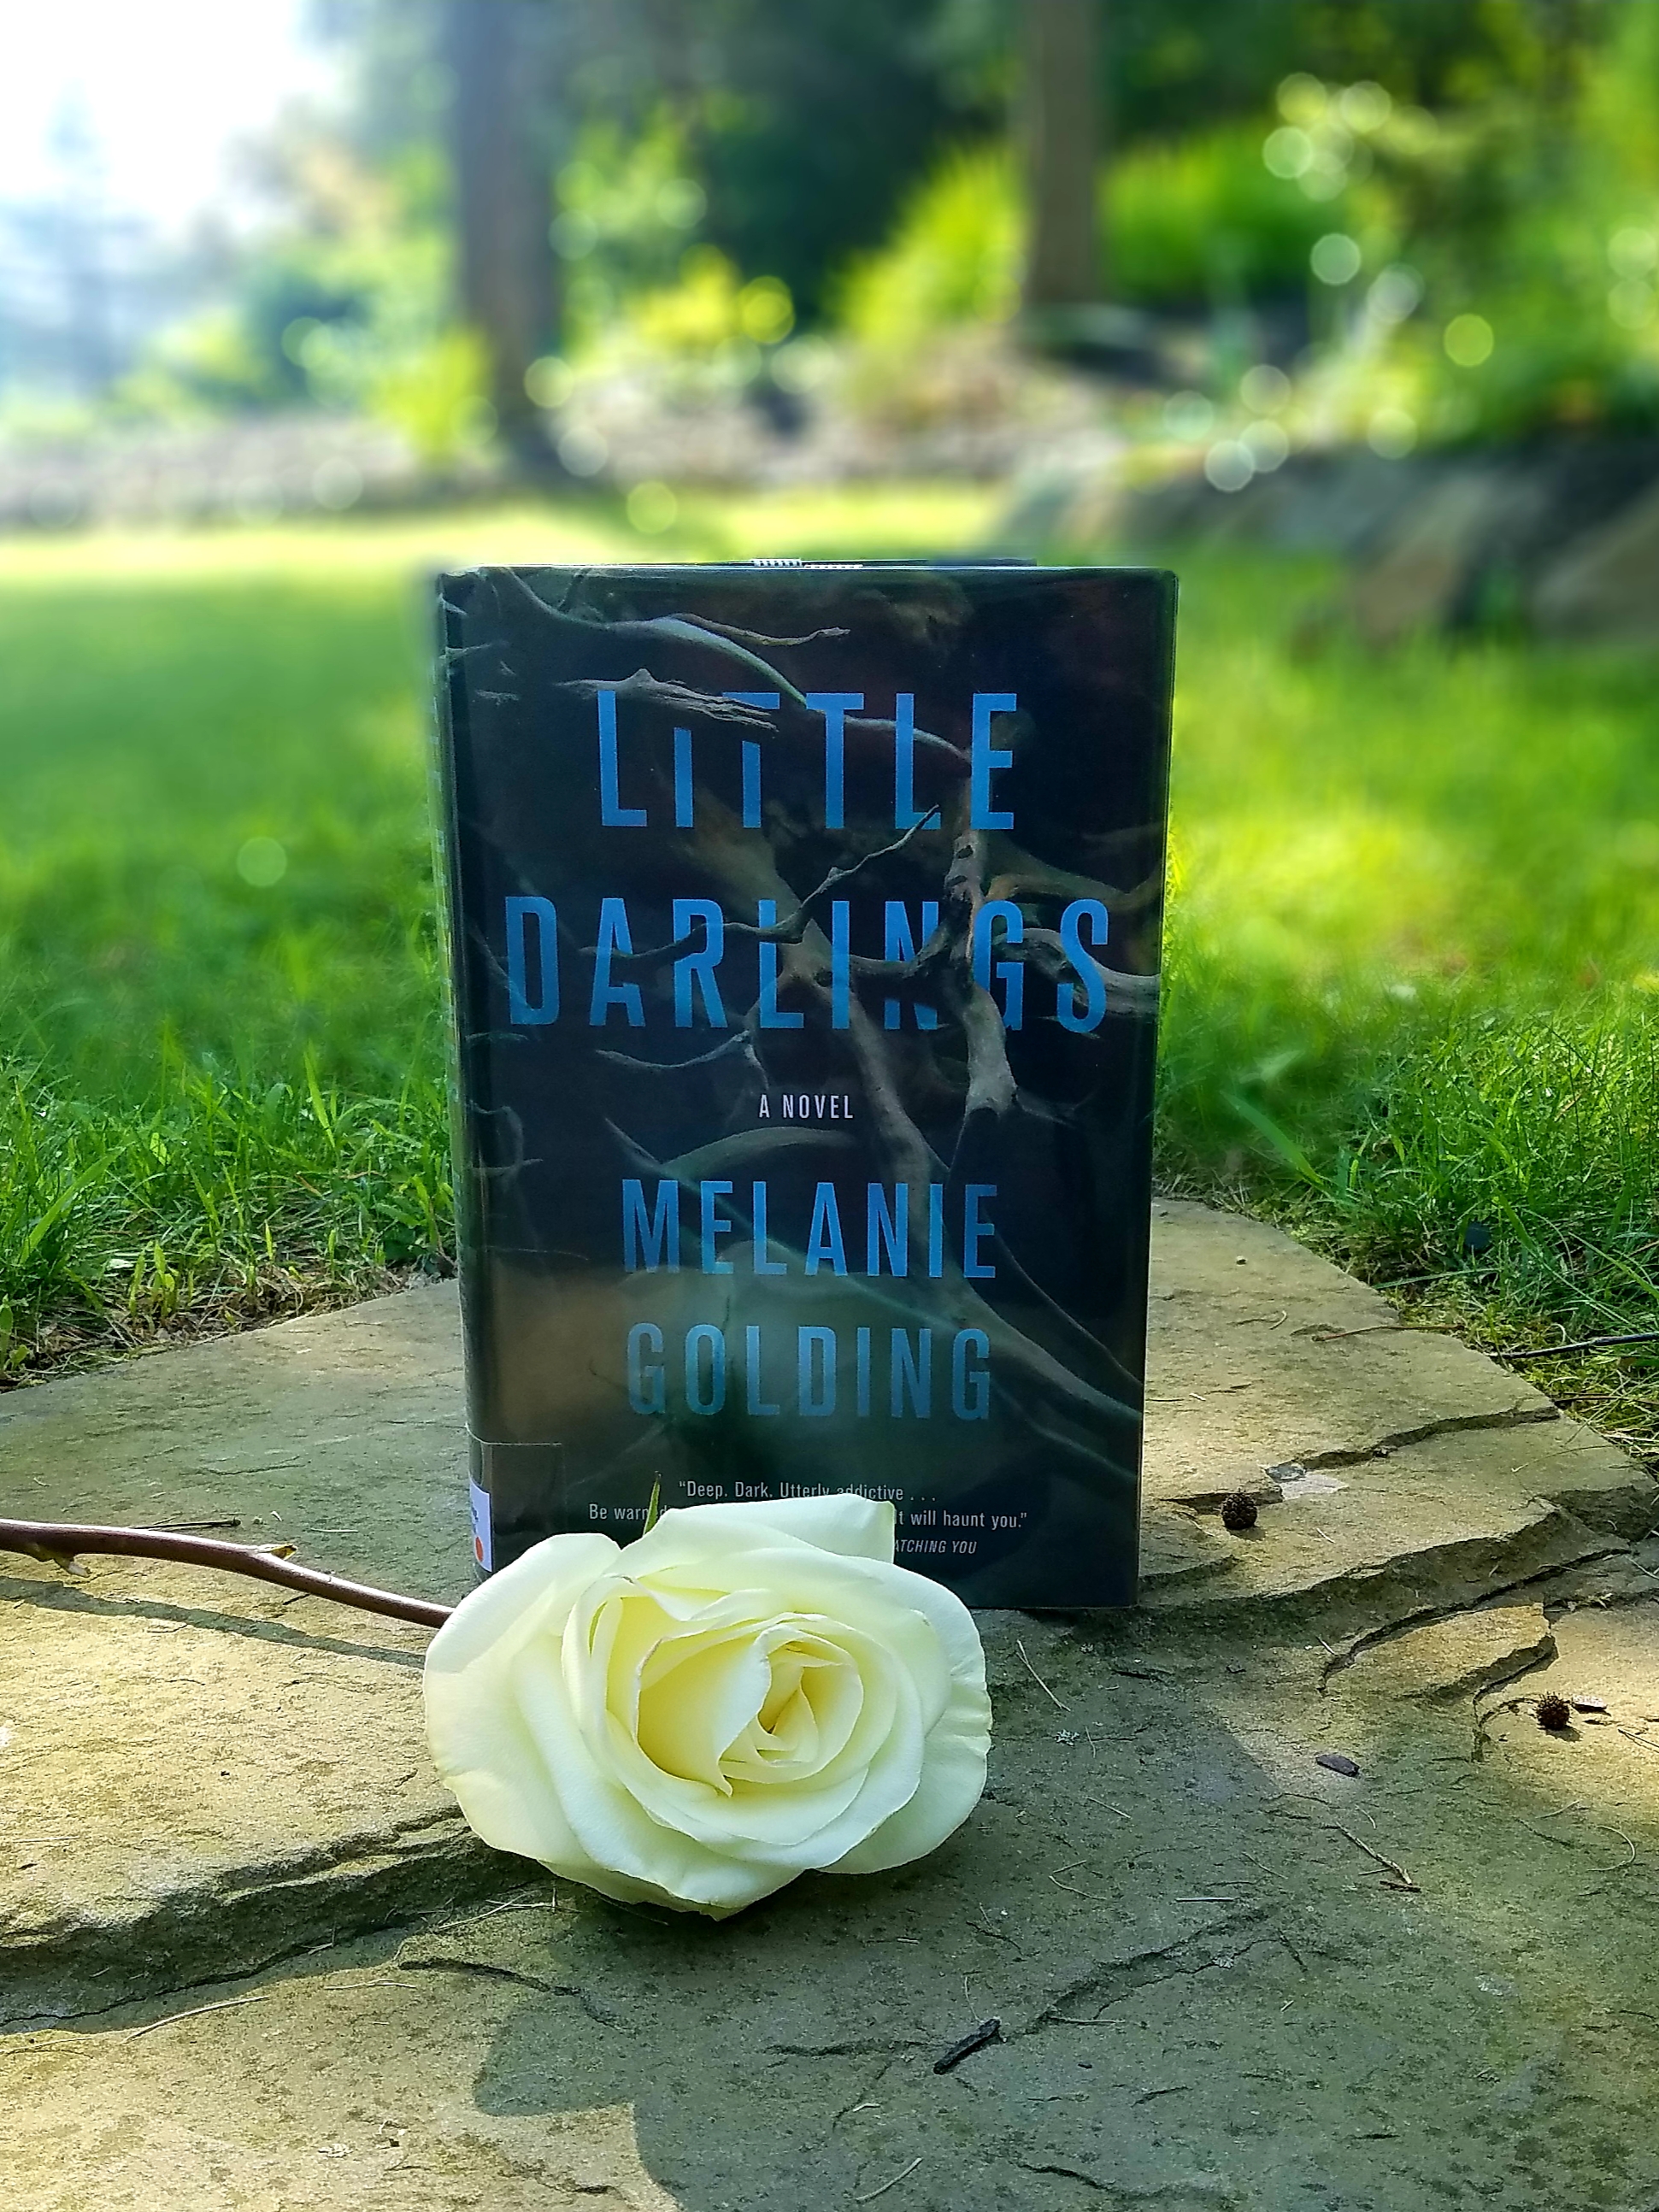 Book Review of LITTLE DARLINGS